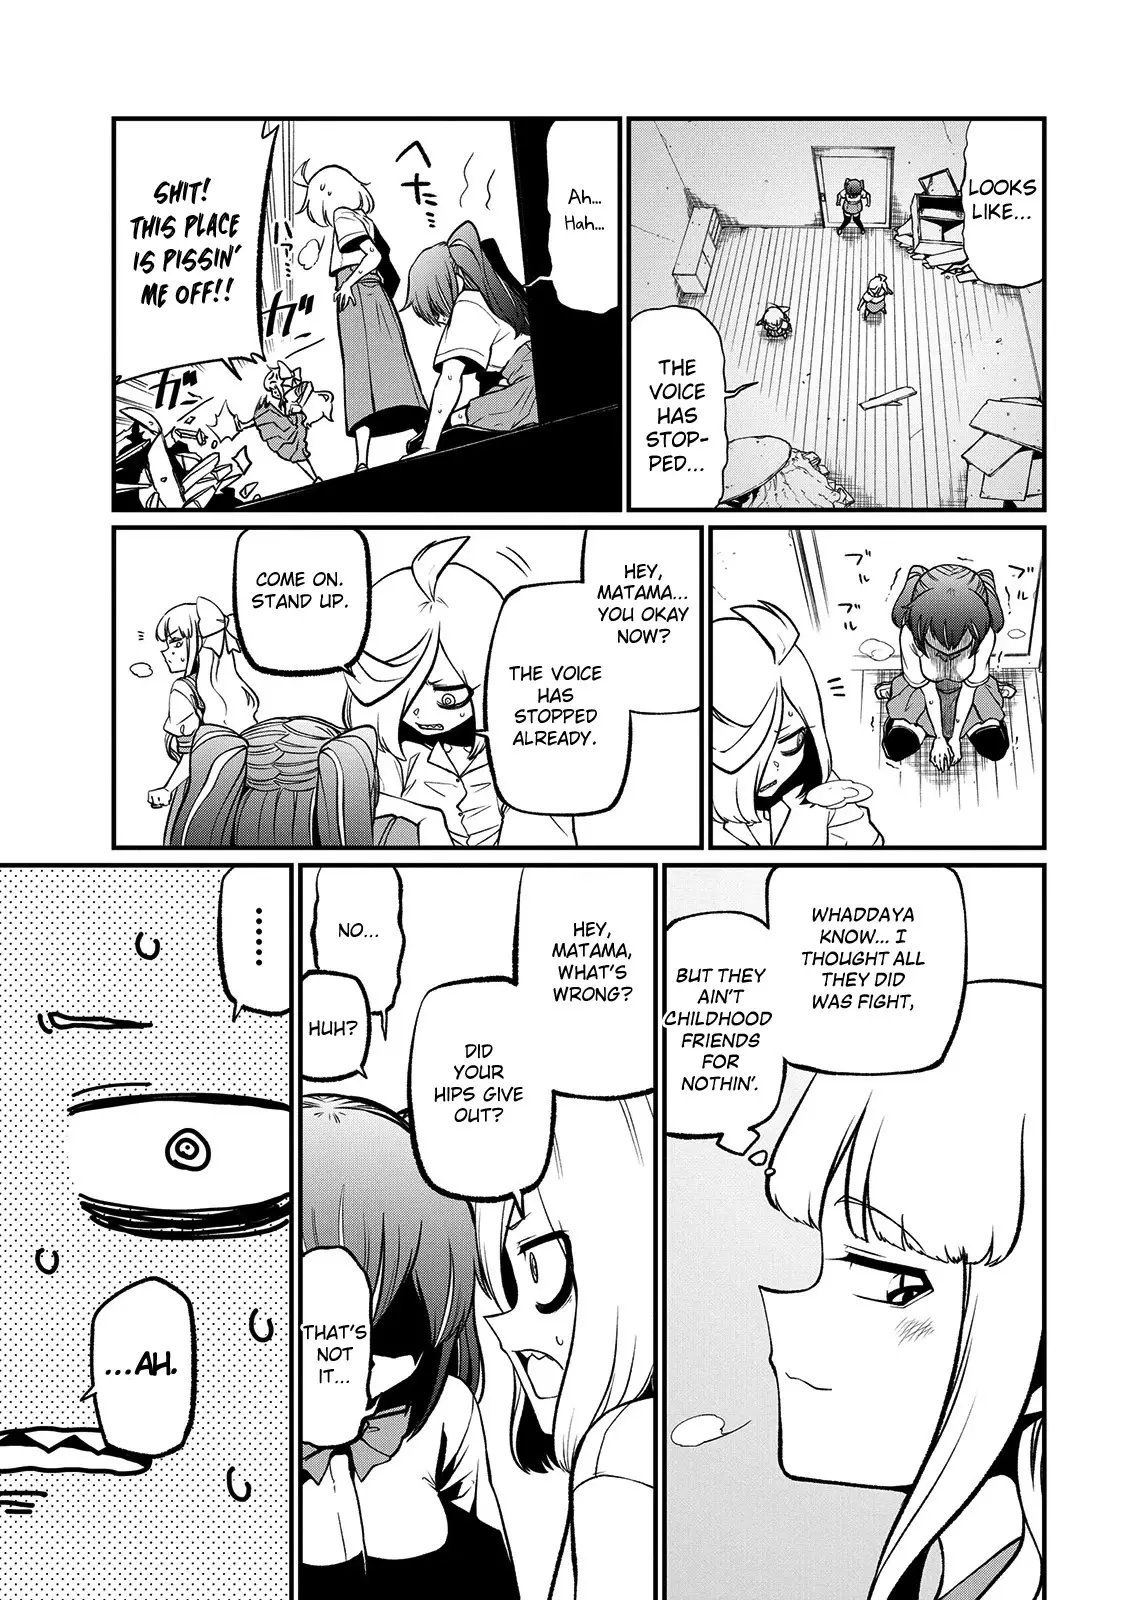 Looking Up To Magical Girls - 40 page 15-731115eb